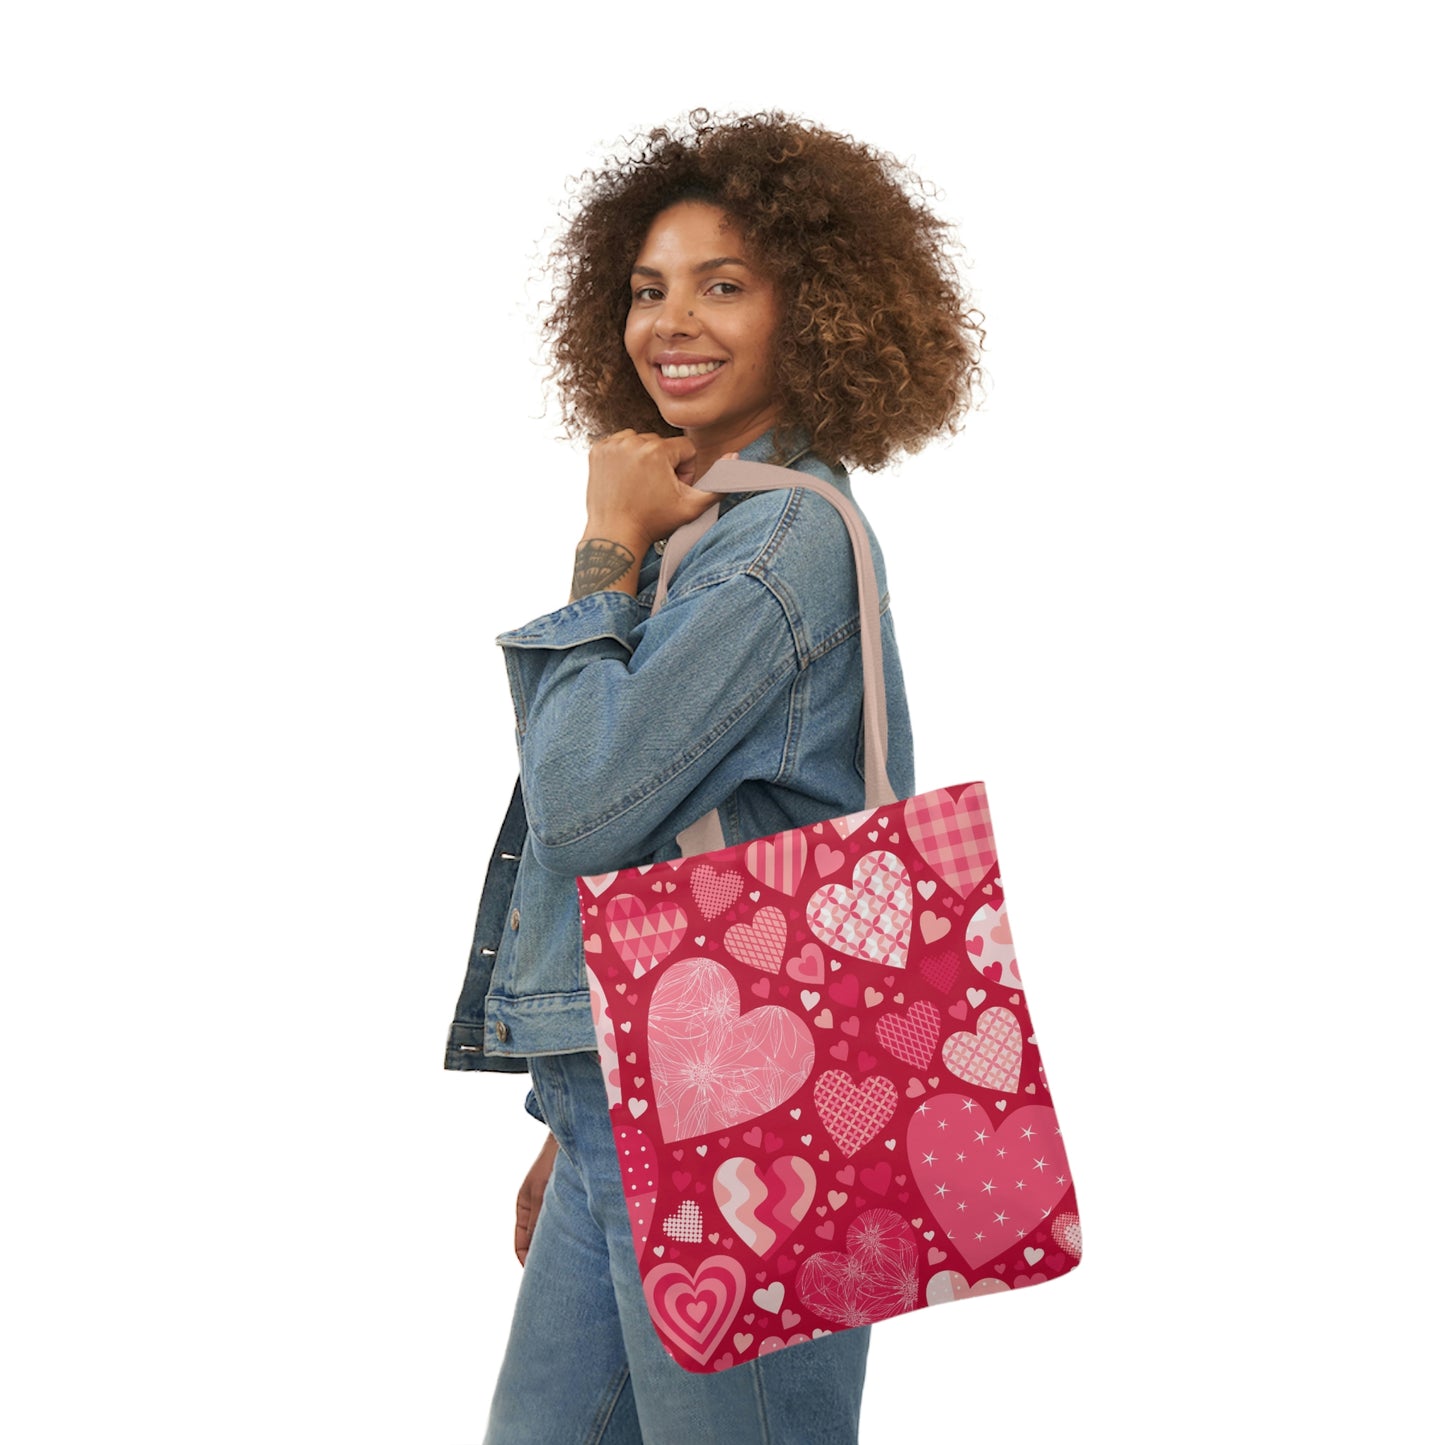 Blissful Hearts Canvas Tote Bag